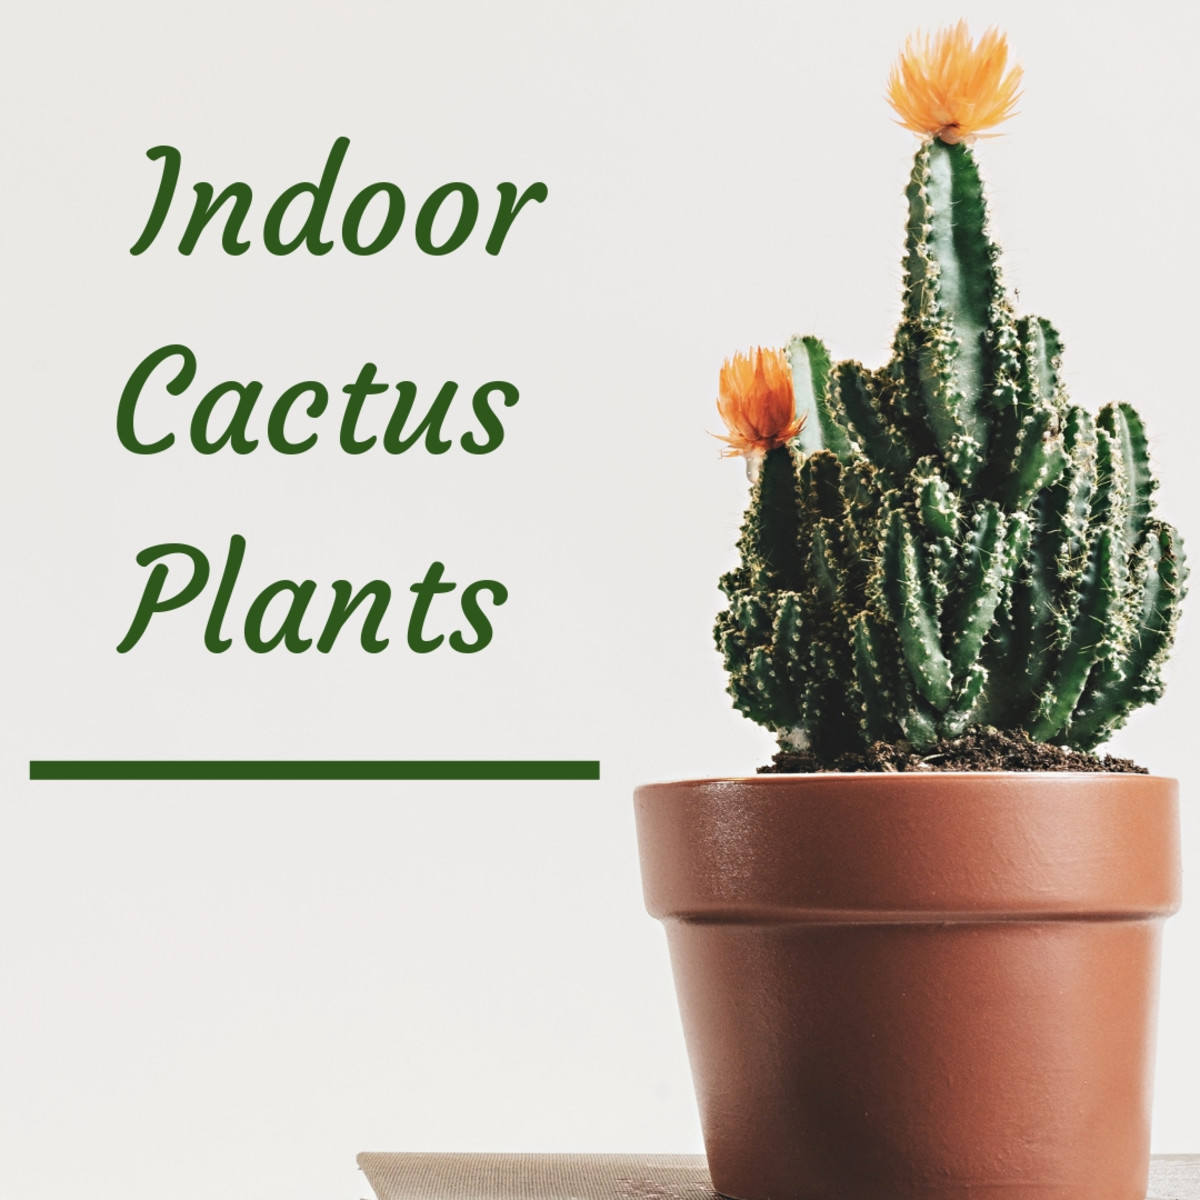 Learn about the 7 most common types of indoor cactus plants.